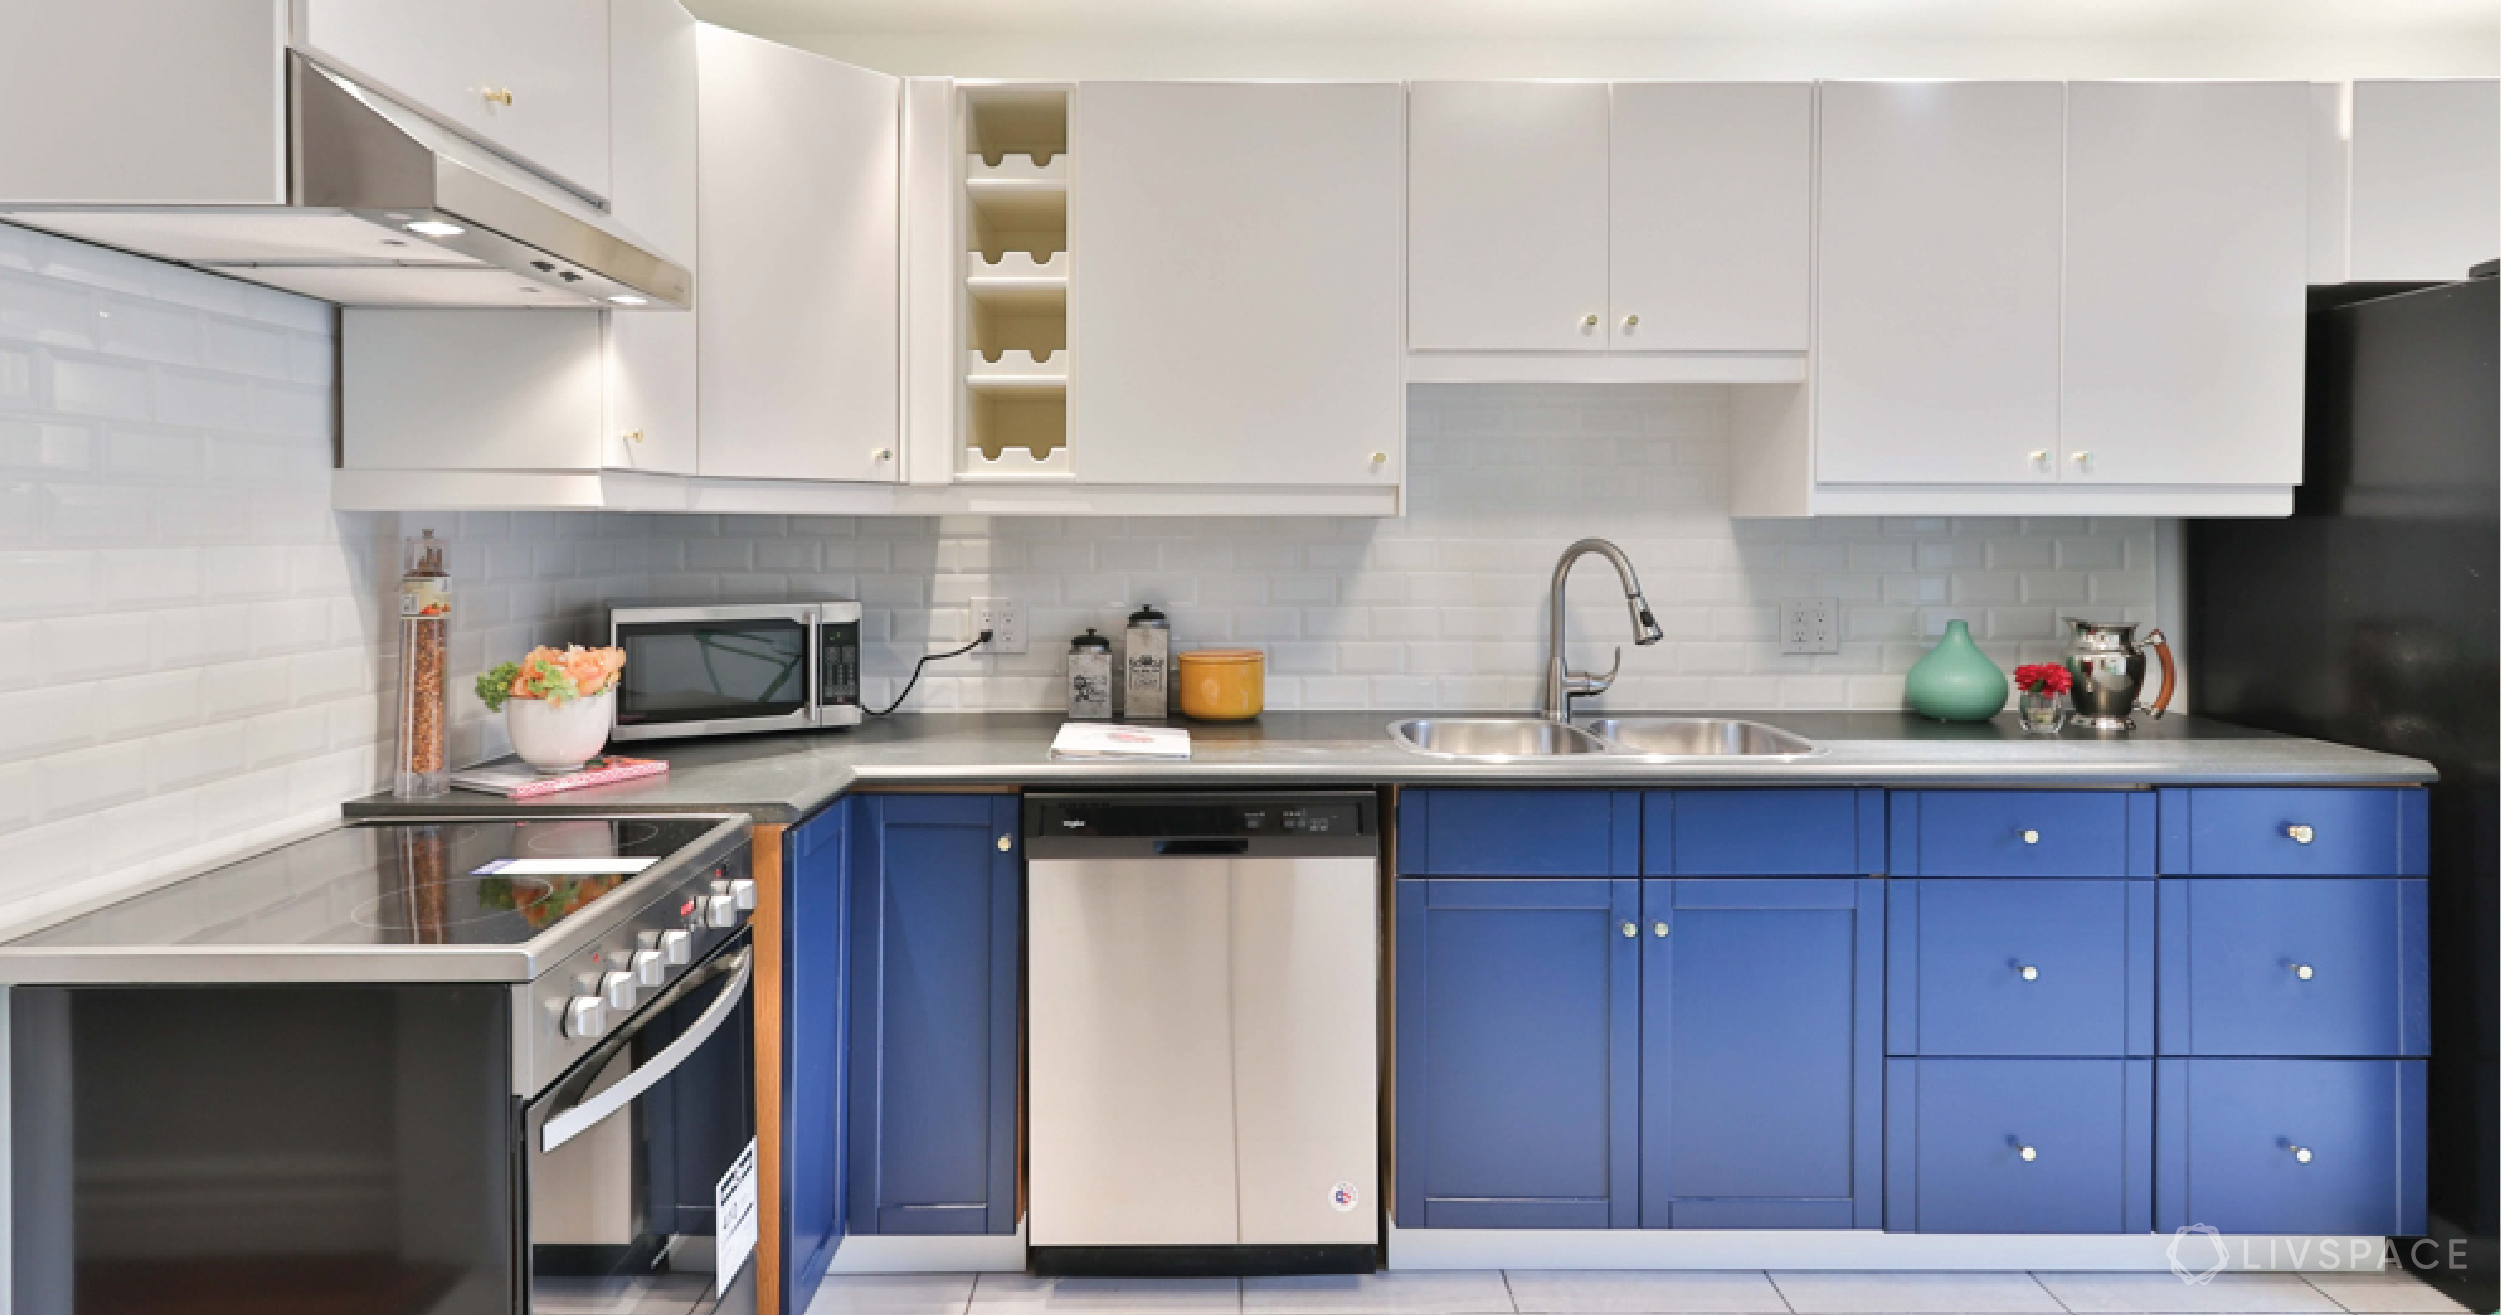 Kitchen Cabinets, How To Clean Plastic Coated Kitchen Cabinets